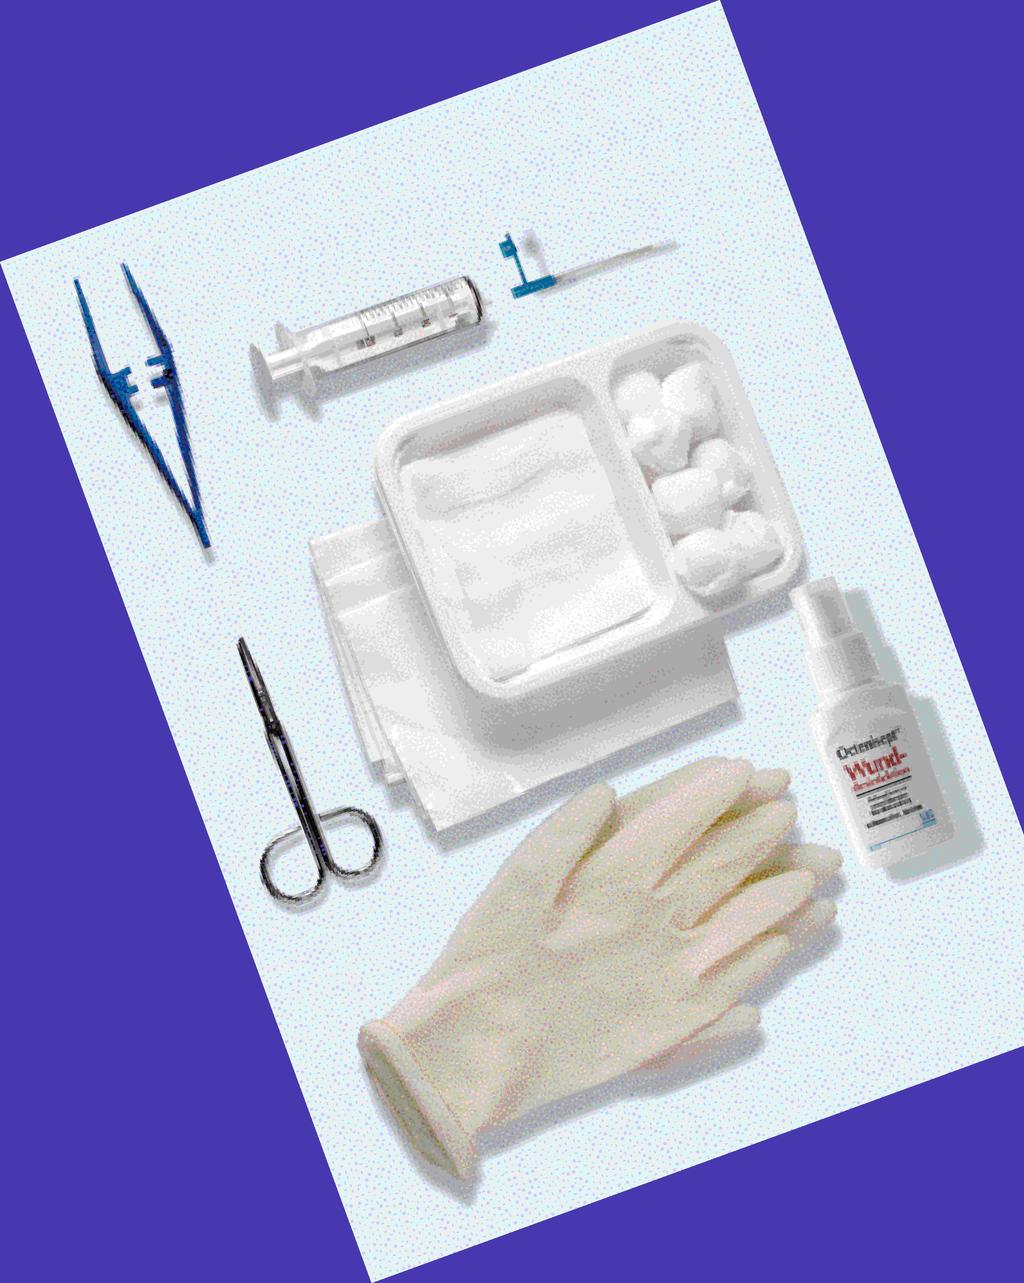 decutastar wound hygiene set standard 24-parted set for topical wound treatment Hygiene set for implementation of a sterile dressing change Applicable on septic and non septic wounds Optimized for